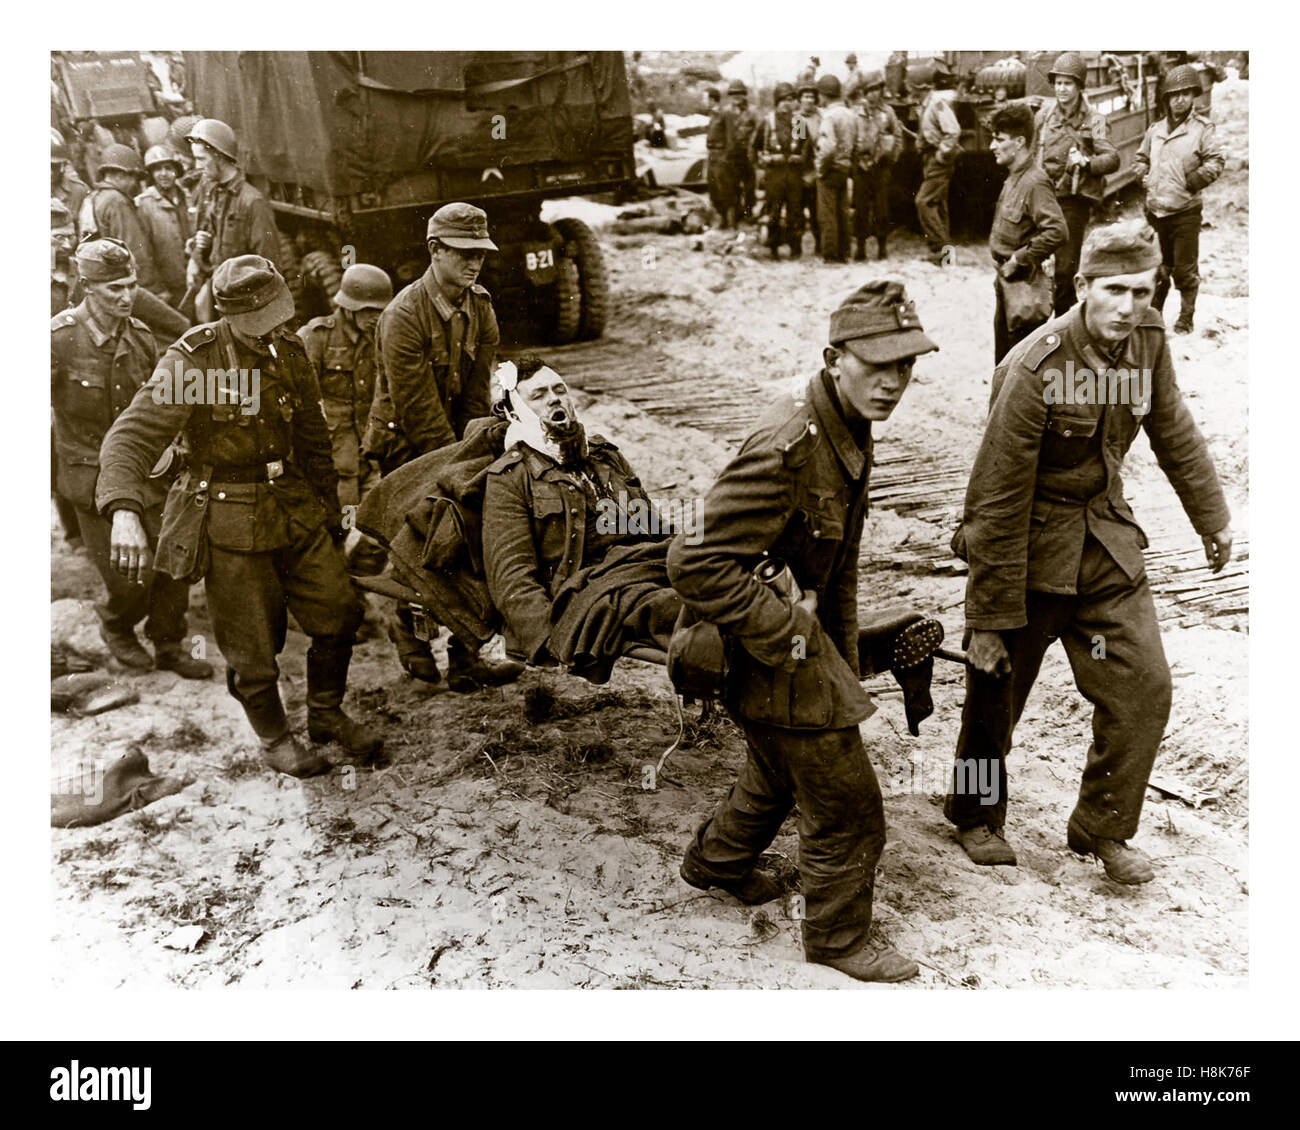 NAZI WOUNDED PRISONERS D-Day Operation Overlord WW2 German POW's carry wounded comrades to landing craft on a Normandy beach with American troops behind June1944 Northern France Stock Photo